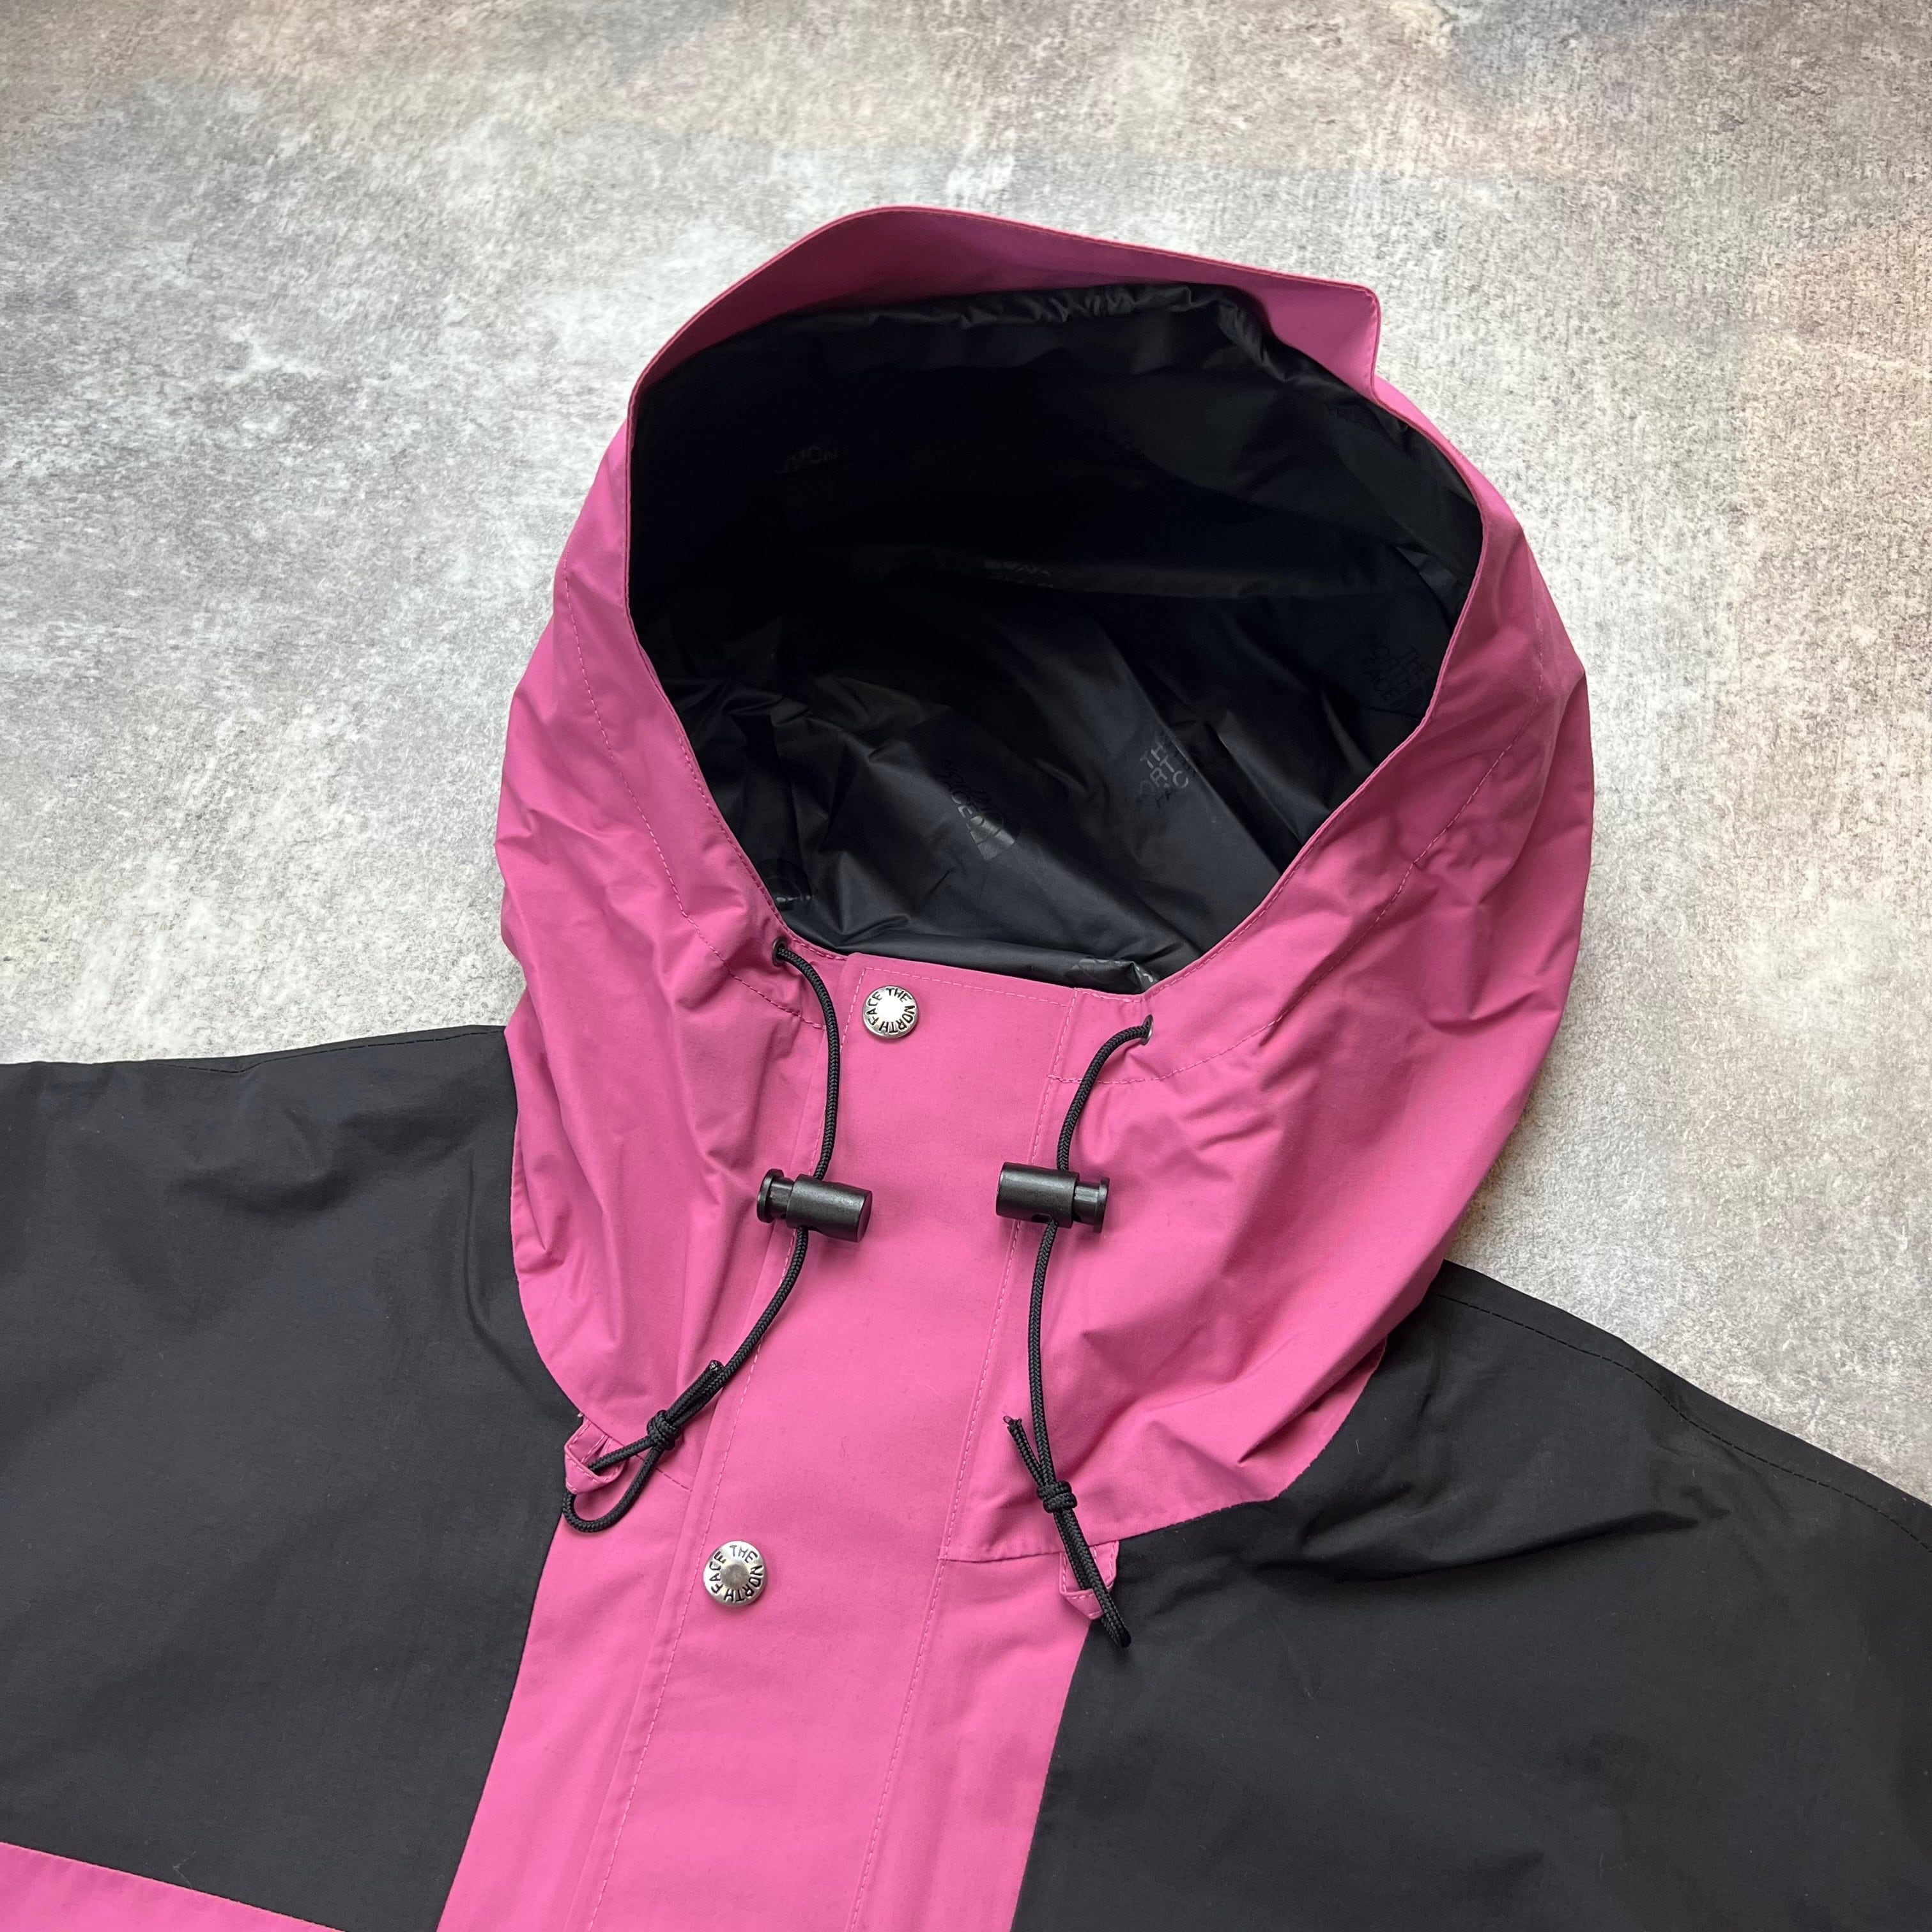 THE NORTH FACE / Men's  Retro Mountain Jacket / Red Violet   TheMEME